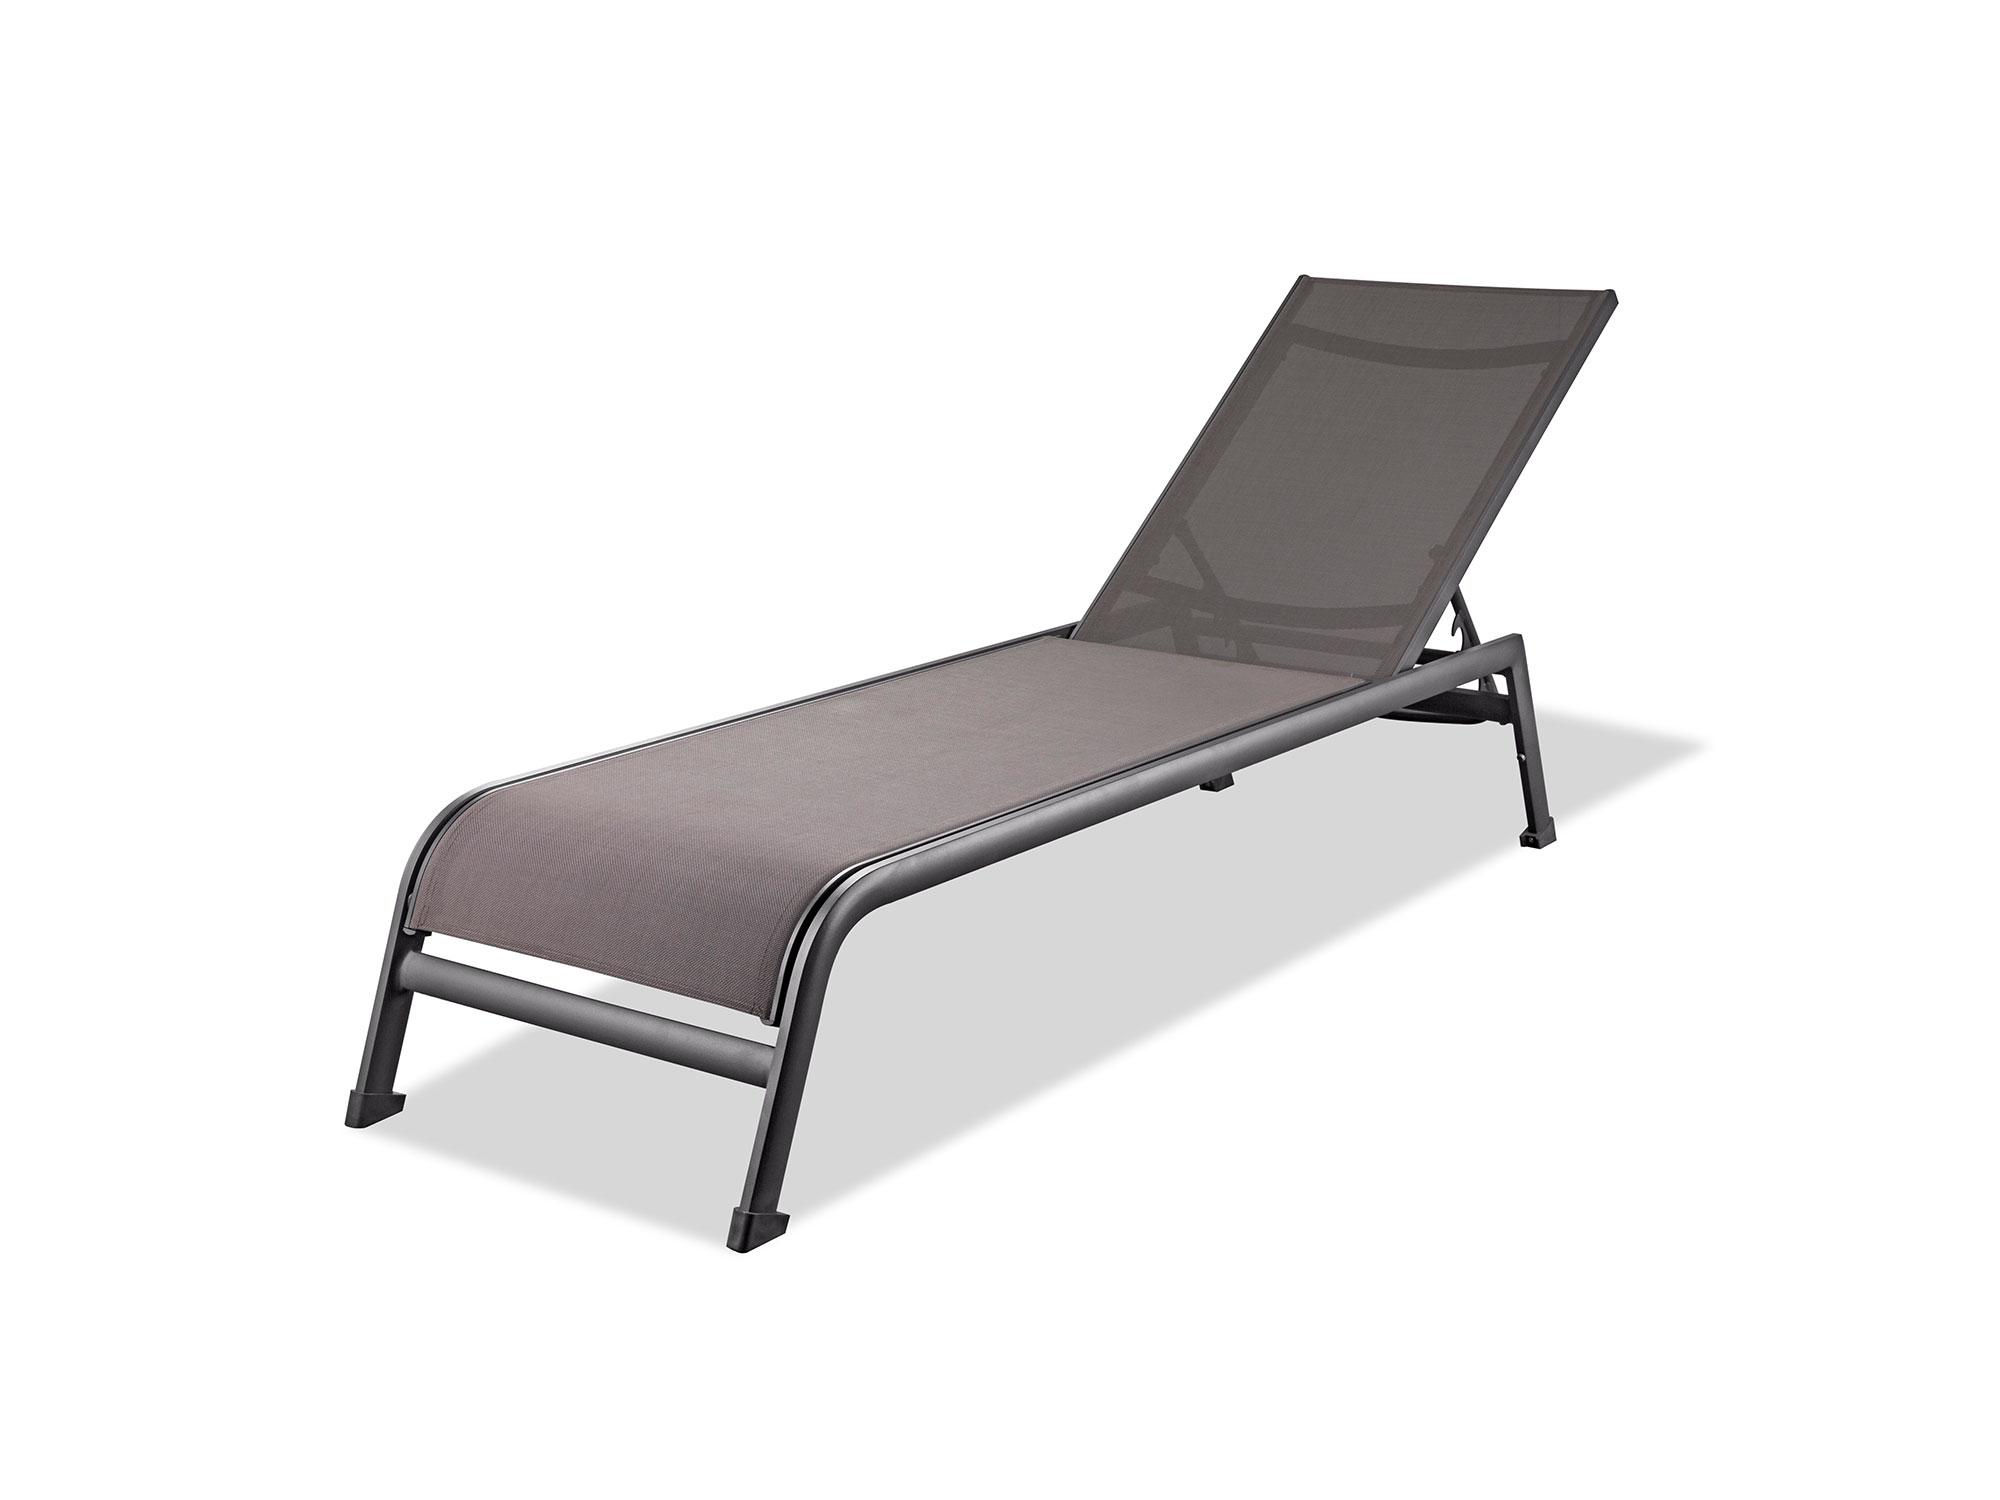 Modern Outdoor Chaise CL1568-TAU Sunset CL1568-TAU in Taupe 